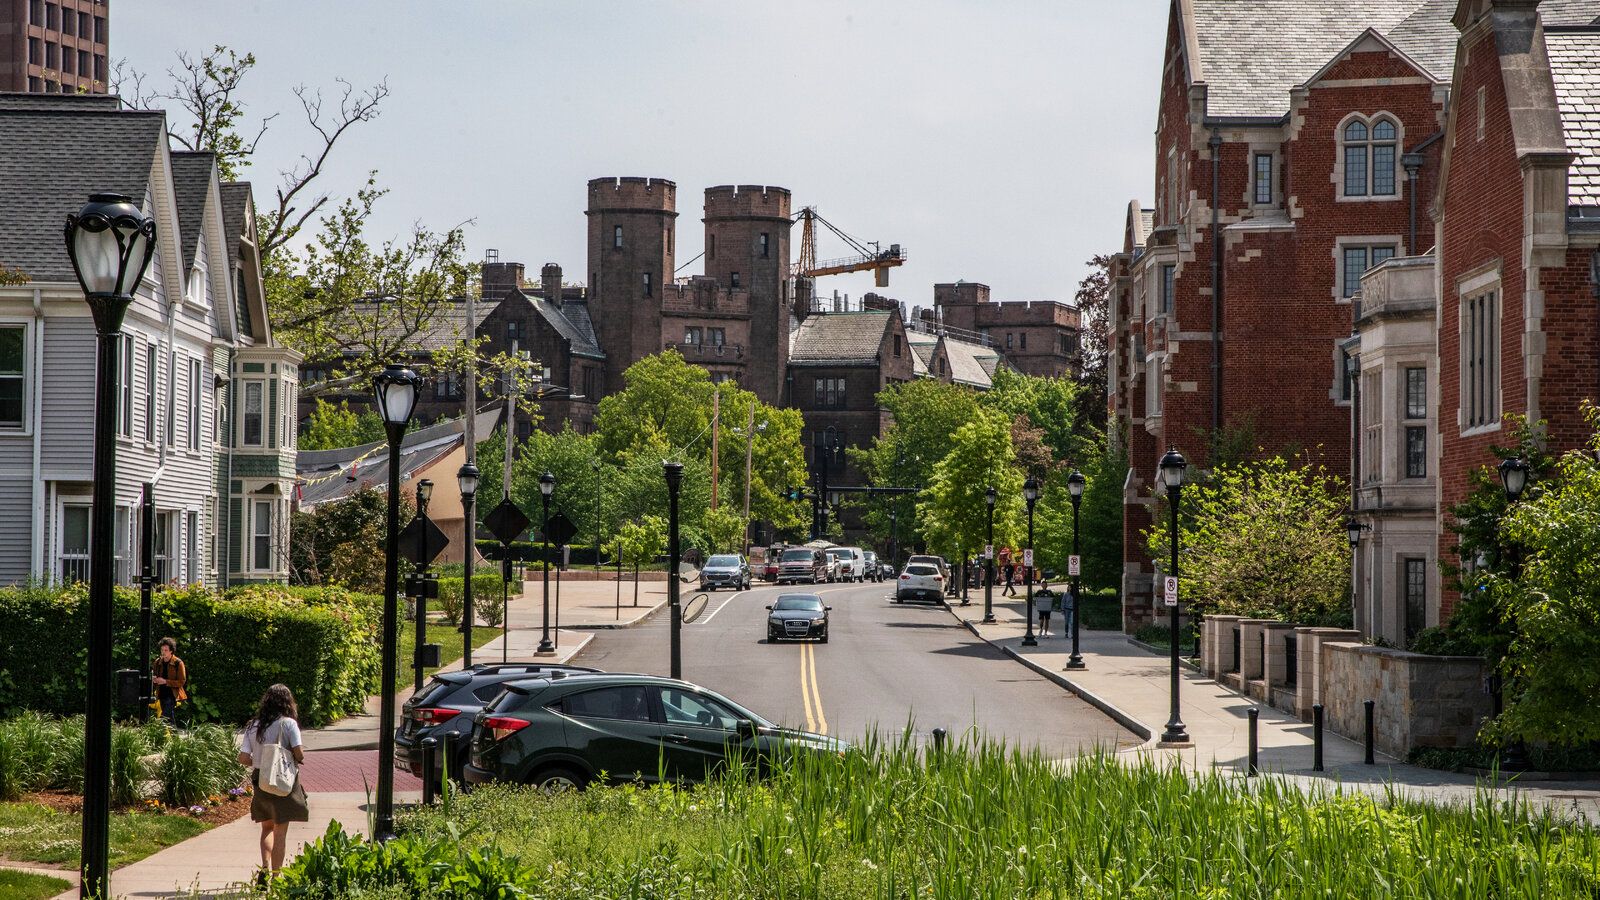 <p>One of the most <a href="https://frenzhub.com/best-small-town-in-america-to-visit/" rel="noopener">prominent institutions in the United States,</a> Yale University, is in New Haven. But the neighborhood has one of the worst rates of violence on the East Coast and a grim reality. The crime rate in the city is over twice as high as the national rate.</p> <p>The city’s 6.6% unemployment rate, higher than the state and national averages, exacerbates the situation. Unfortunately, a large portion of the city is underprivileged and plagued by crime; as a result, New Haven has the eighth-highest robbery and the fourth-highest assault rate in the nation.</p>